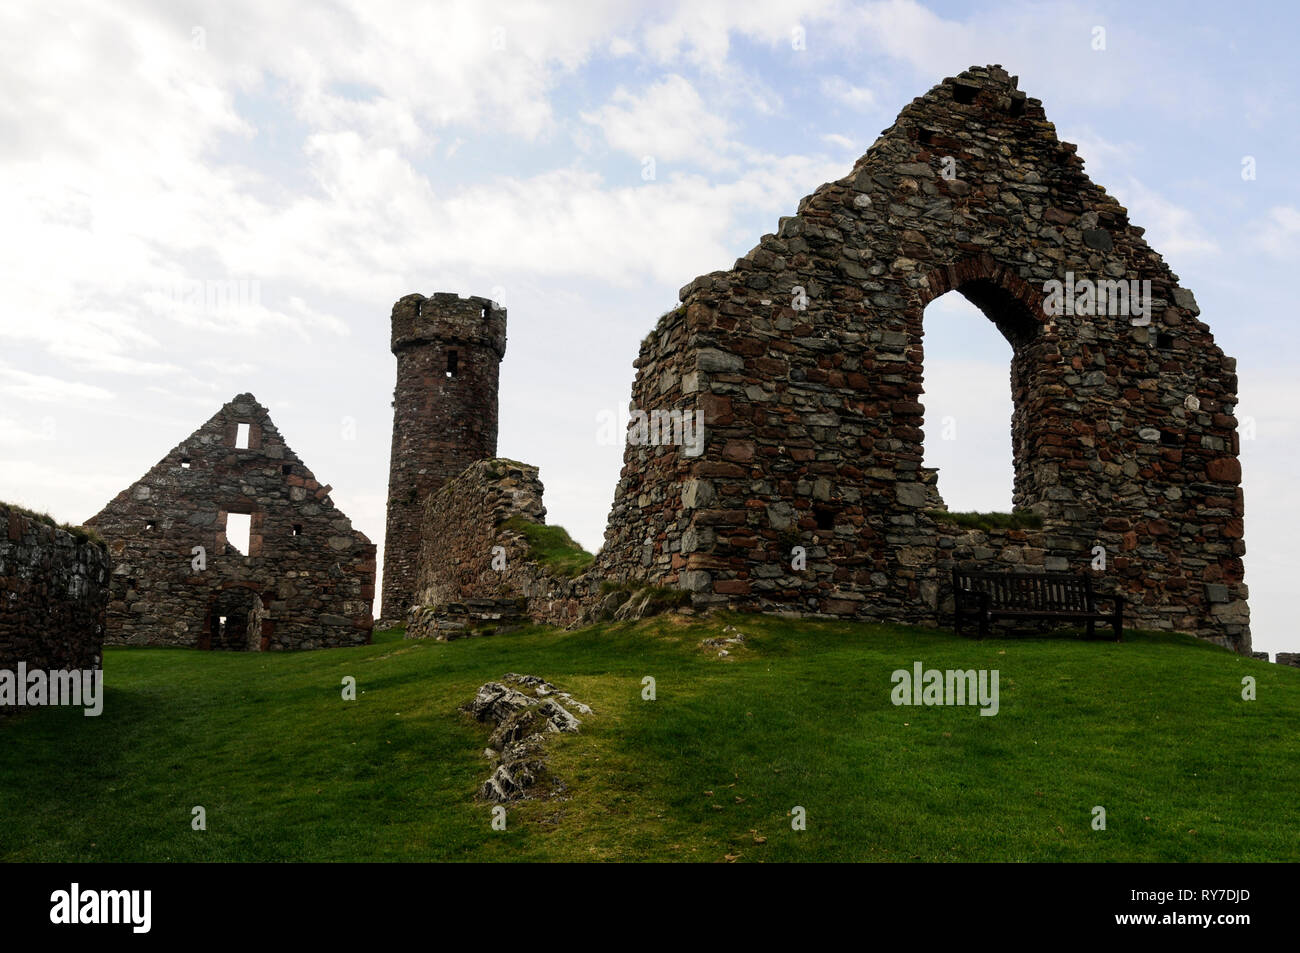 The ruins of St. German Cathedral within Peel castle on St Patrick's Isle connected by a causeway in Peel on the west coast of the Isle of Man, Britai Stock Photo